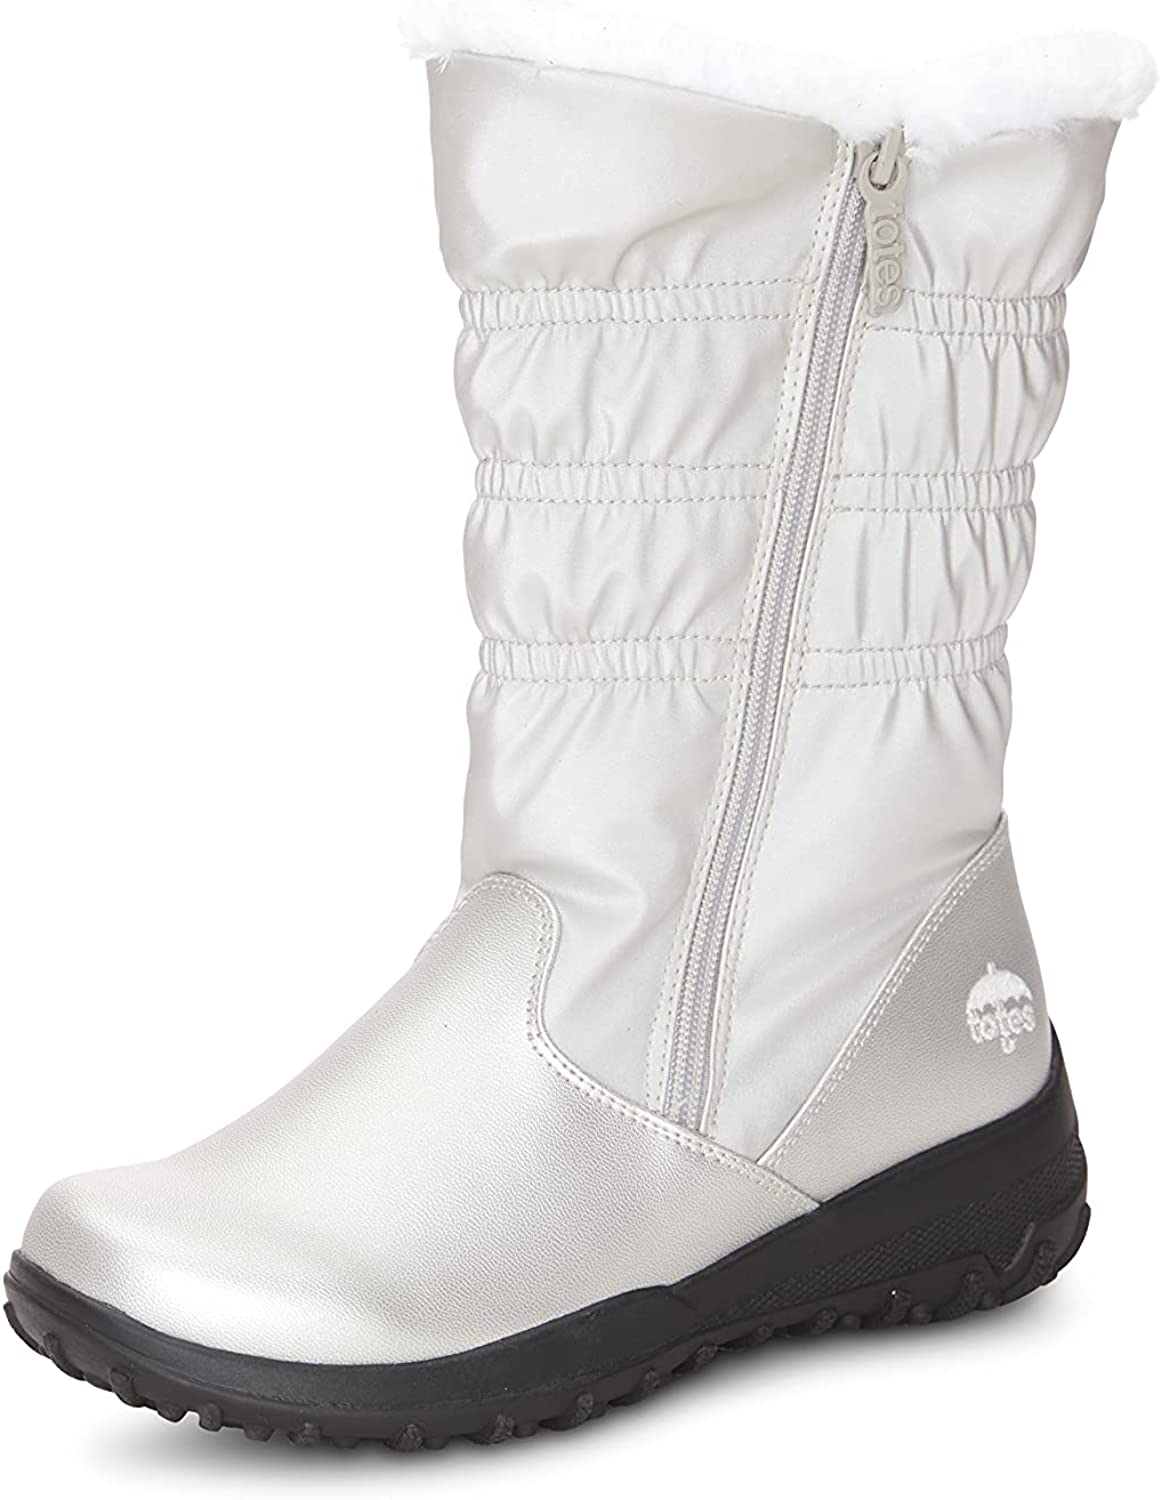 totes Womens Bootie Snow Boot